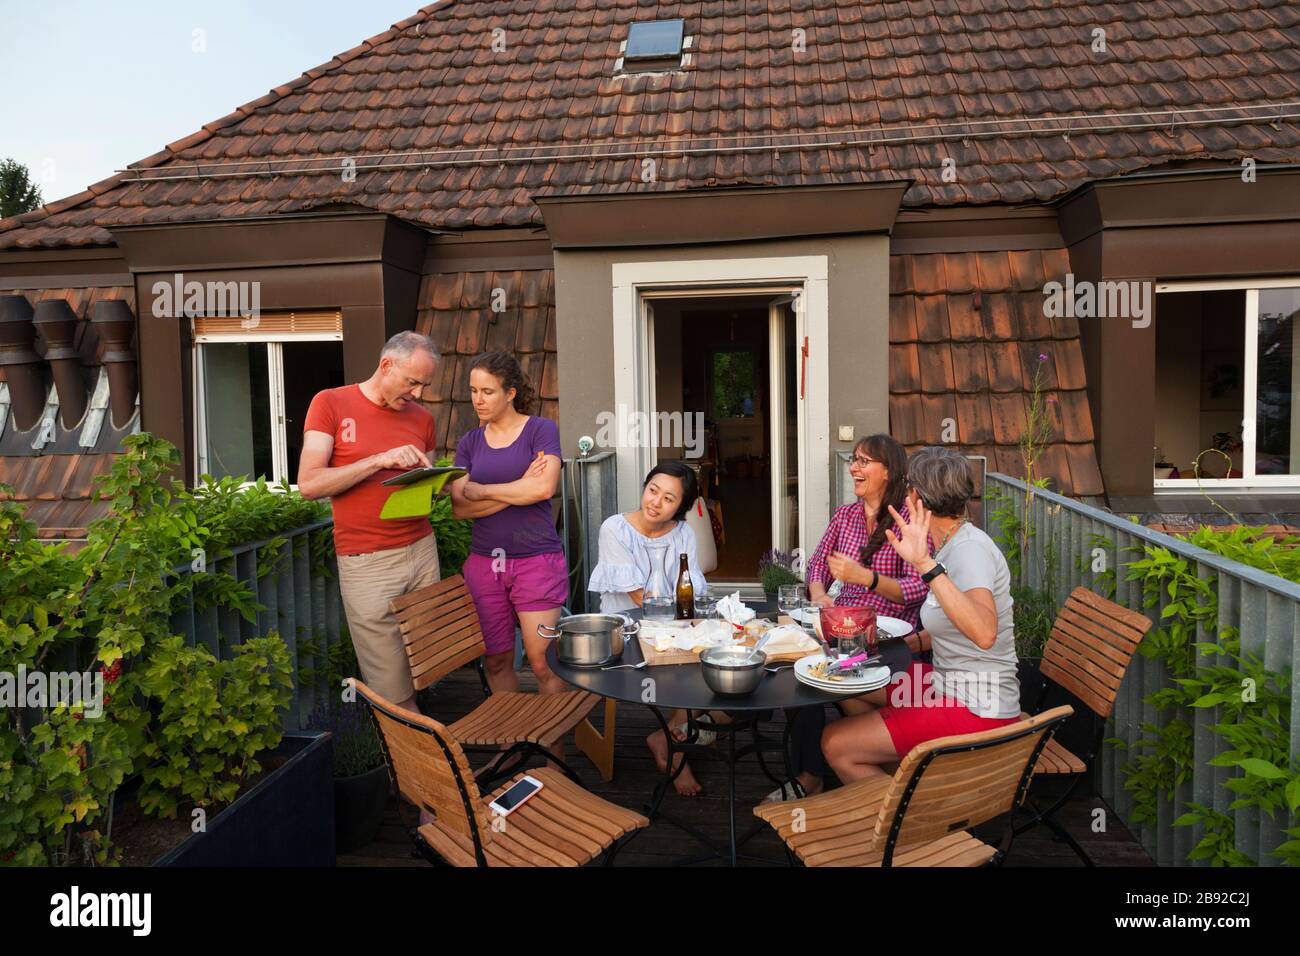 People eat dinner and chat on an apartment balcony in the Unterstrass neighborhood of Zürich, Switzerland. Stock Photo